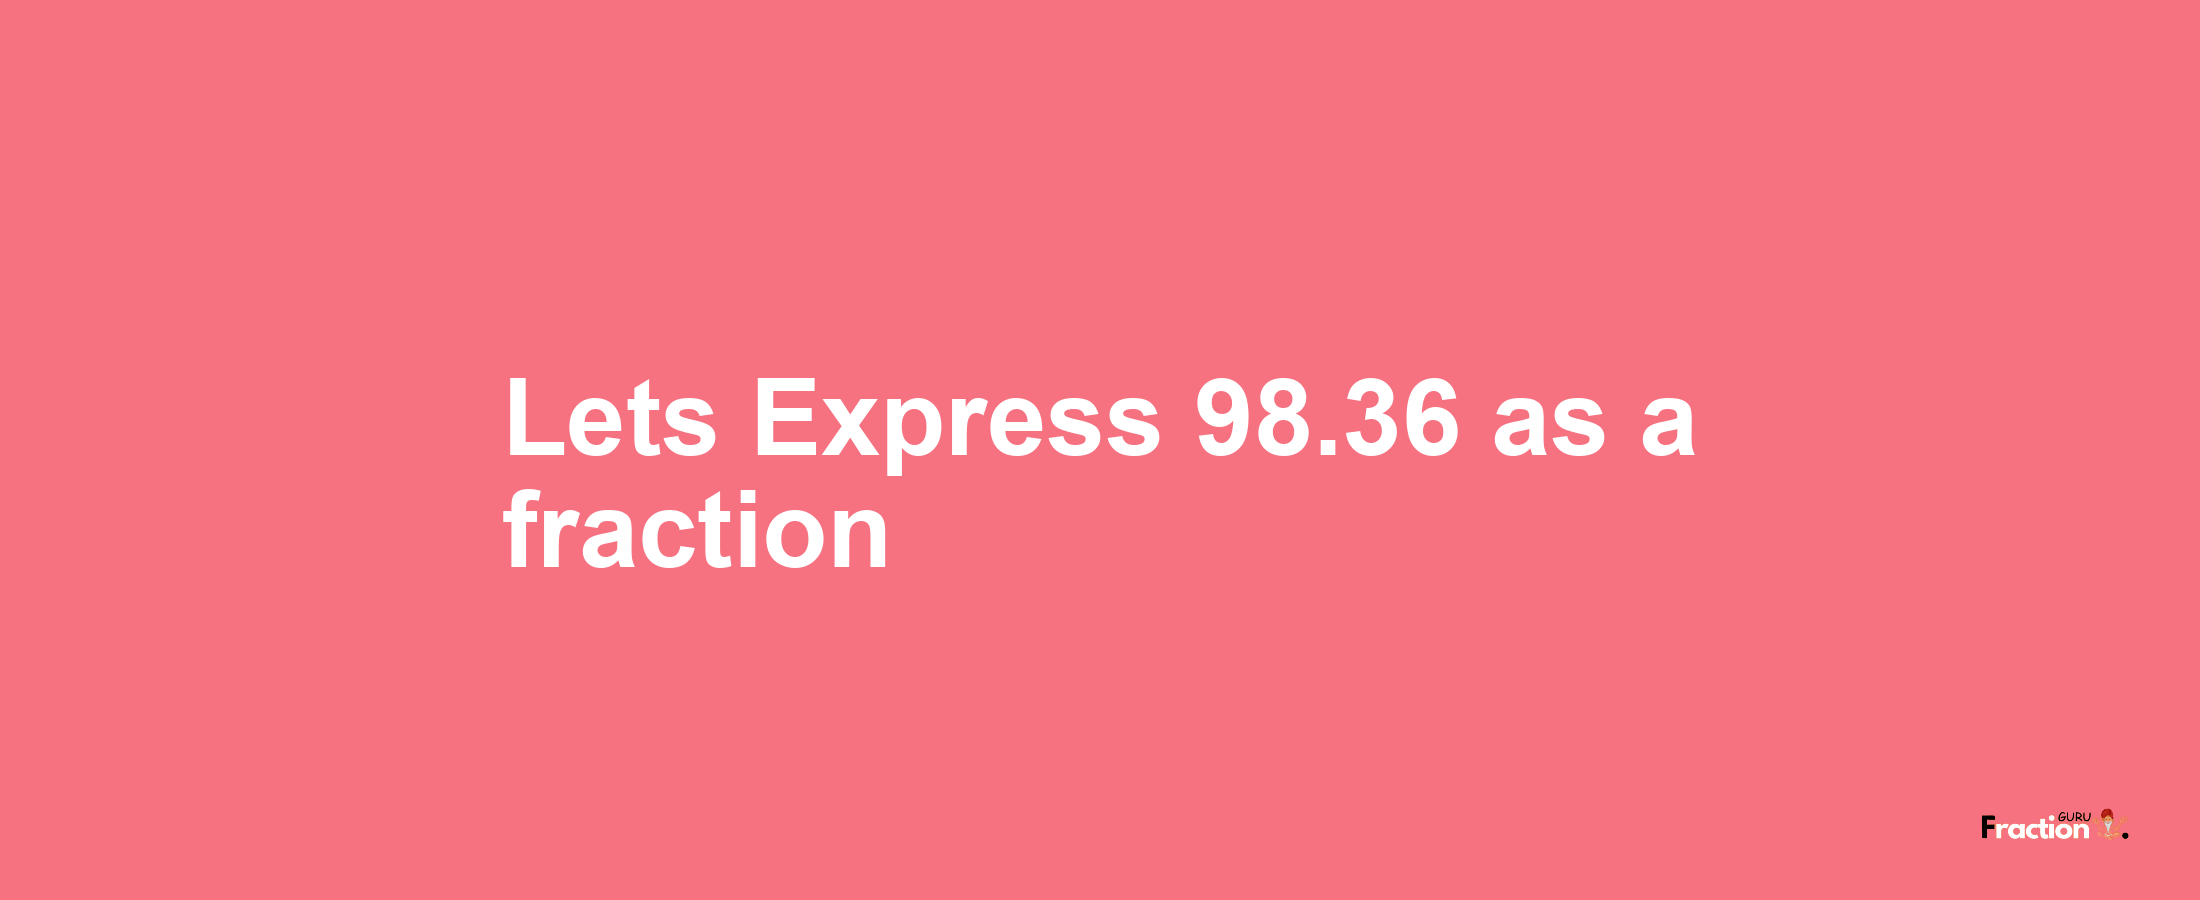 Lets Express 98.36 as afraction